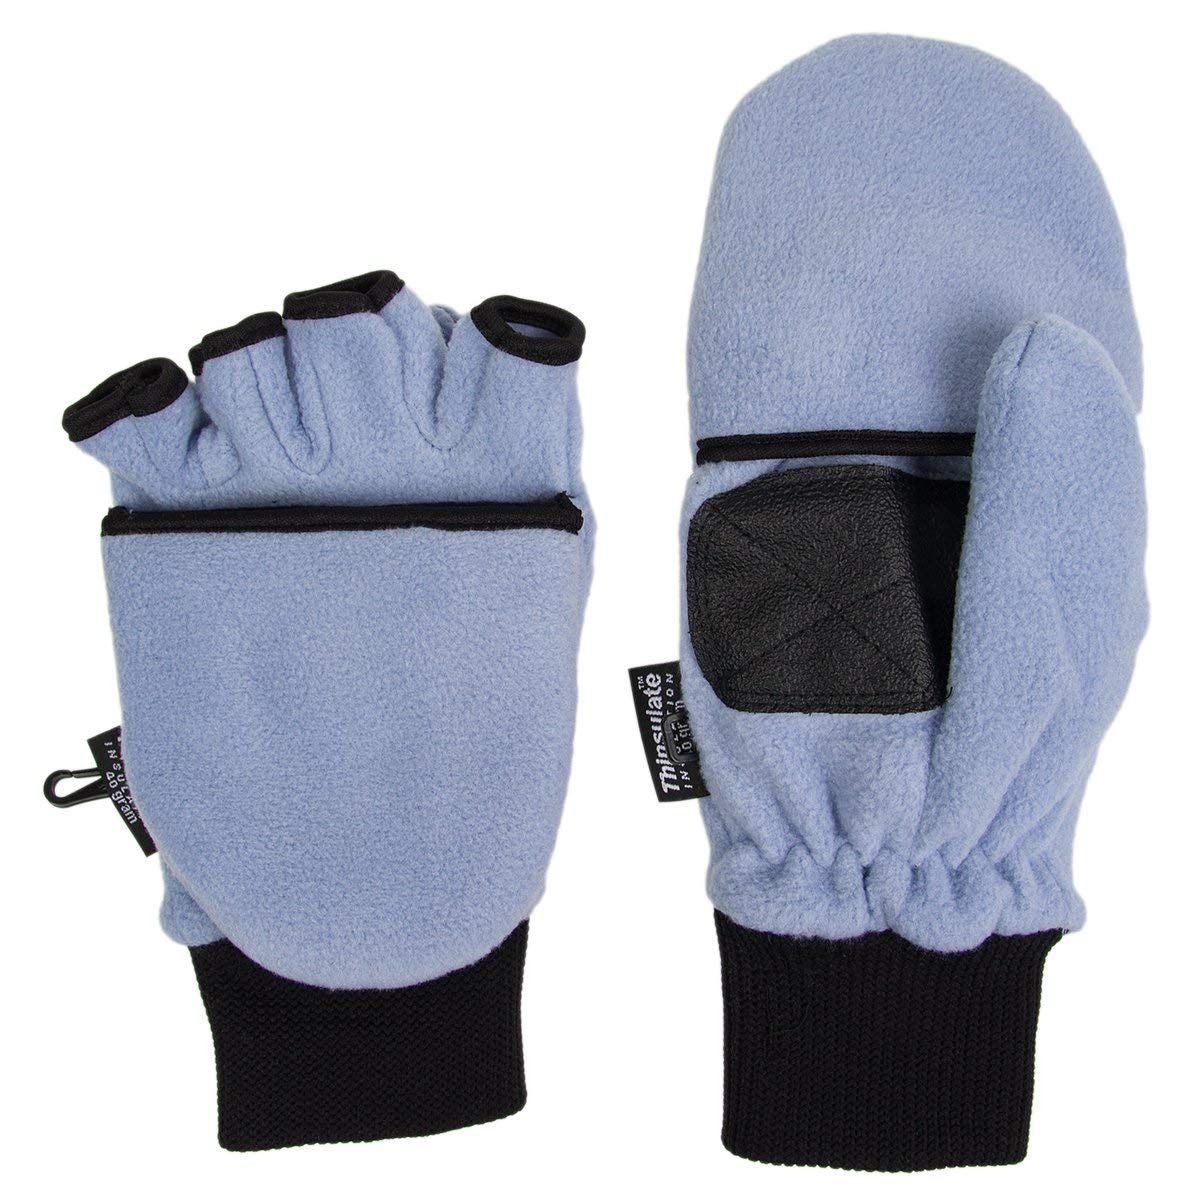 these are the only gloves you’ll need all winter